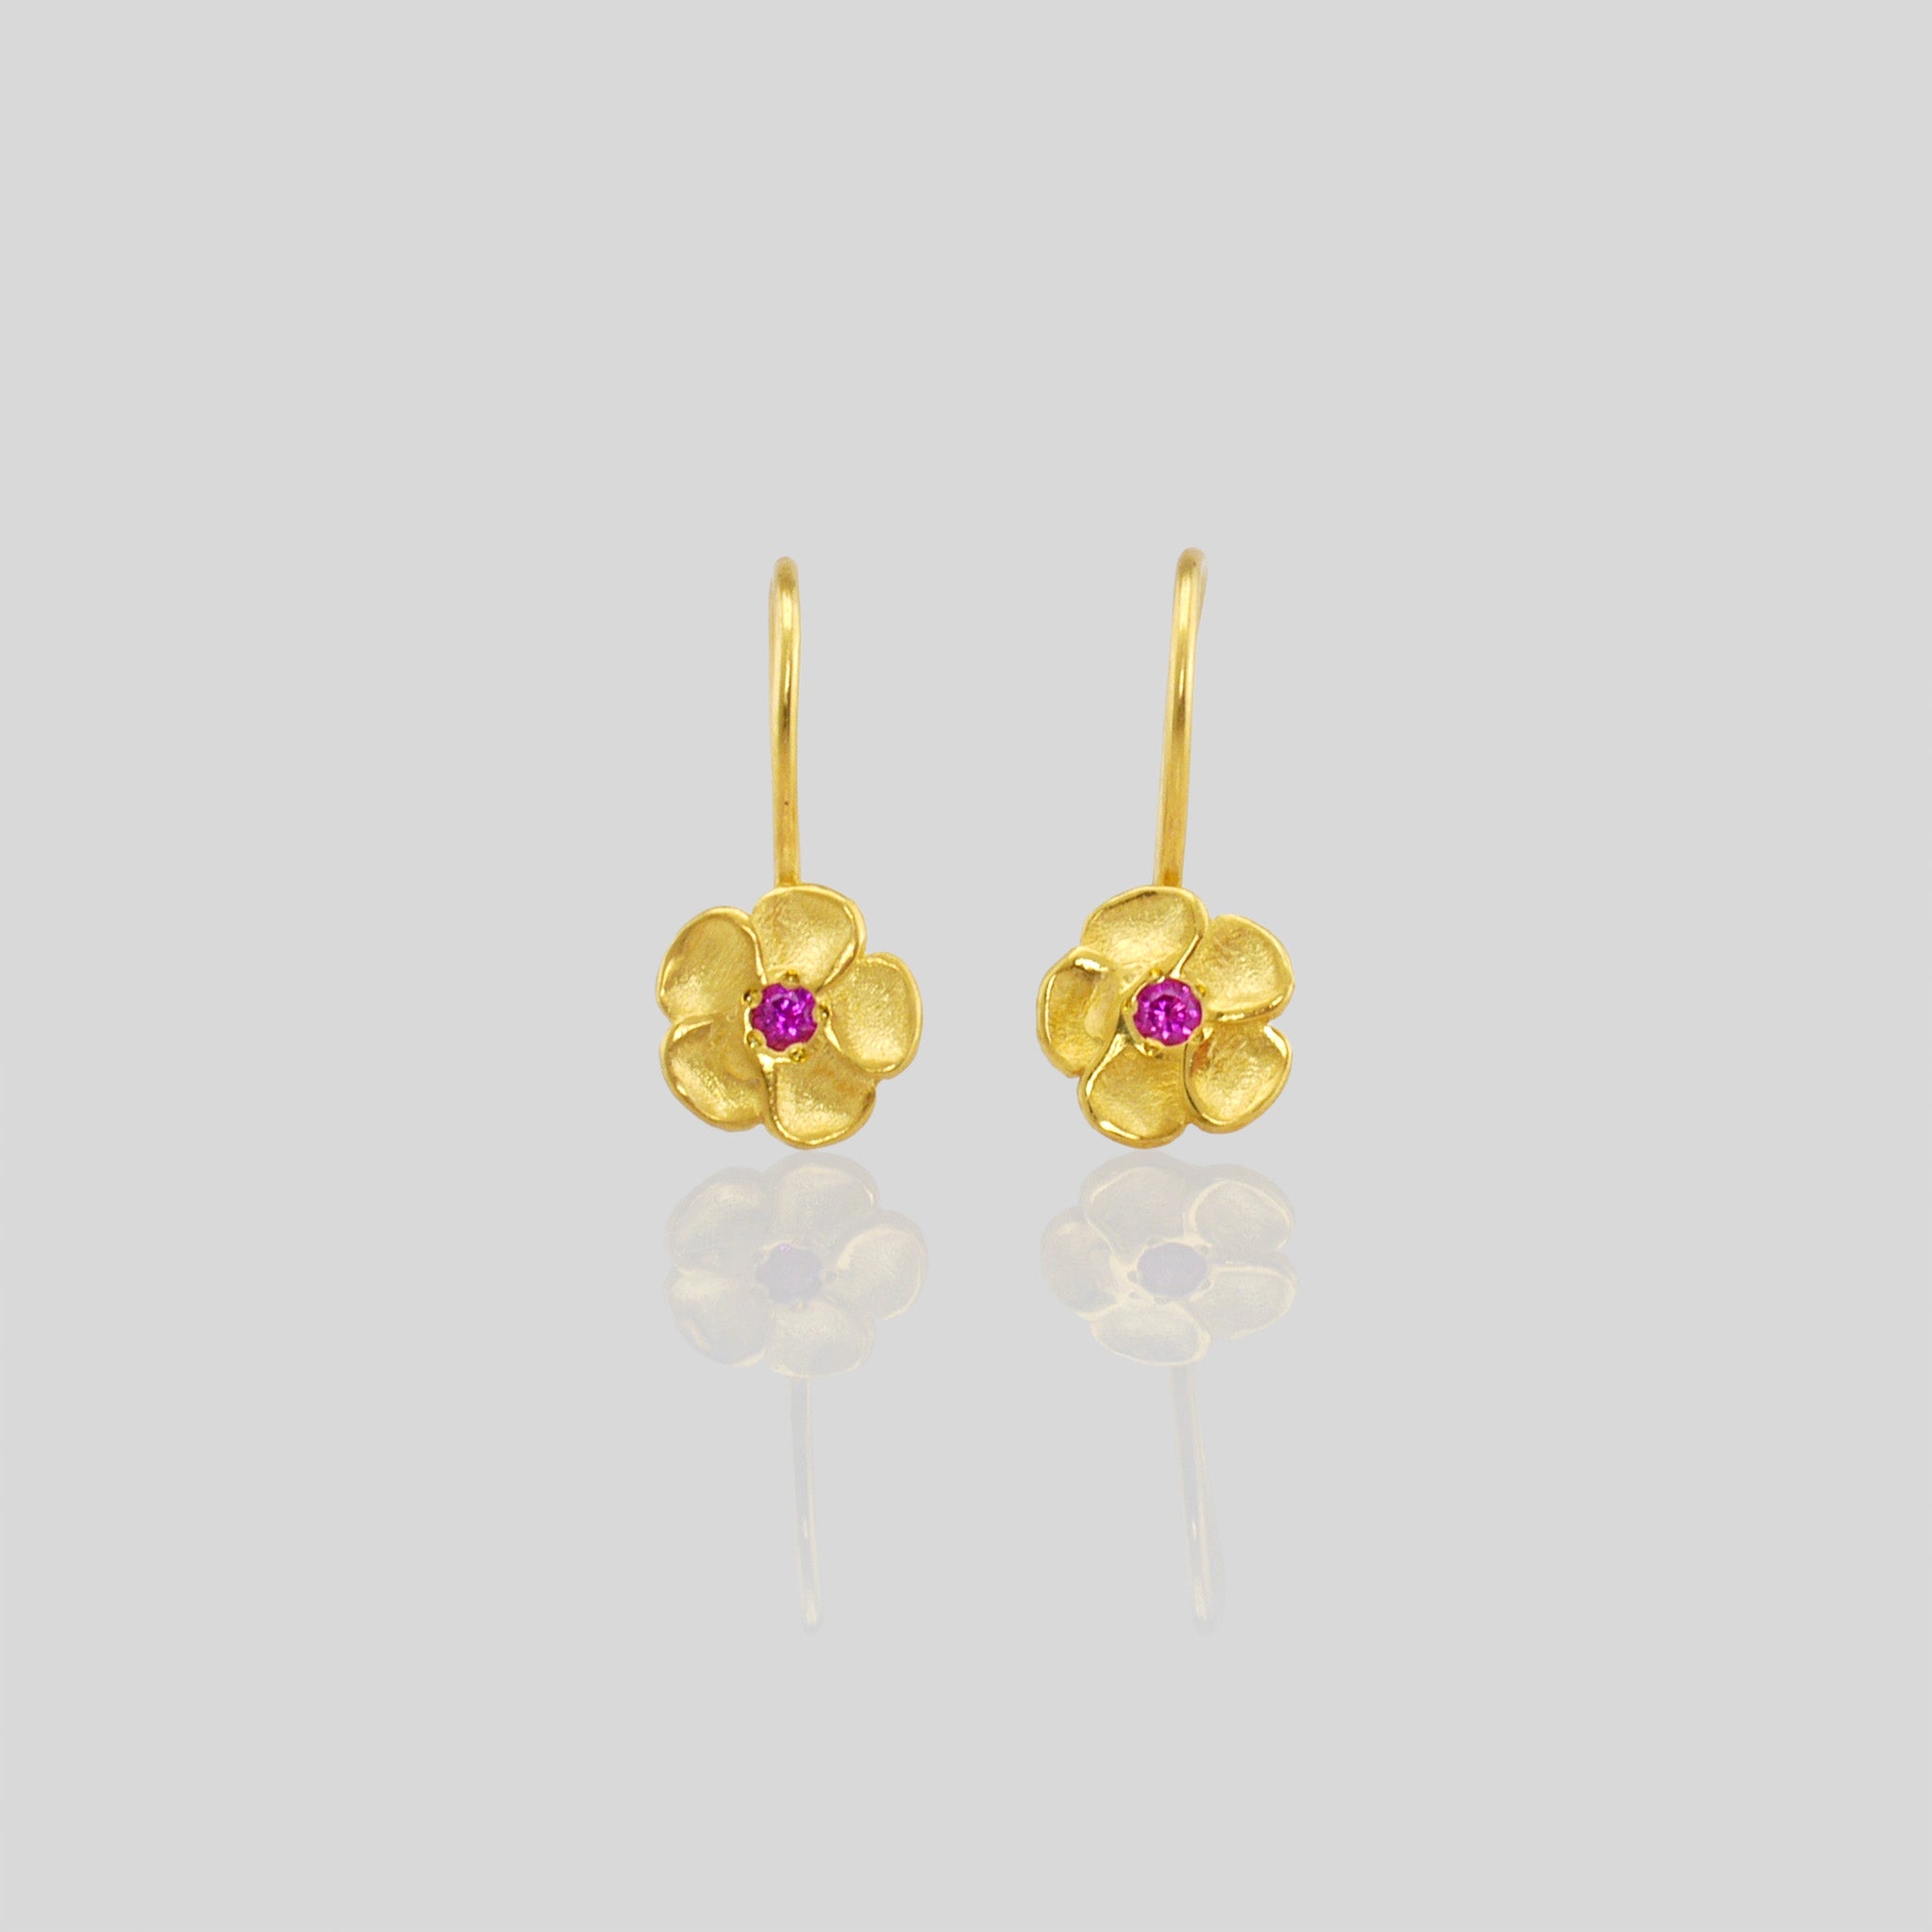 Close up of delicate yellow gold flower drop earrings with a sparkling ruby center. Perfect for any occasion!